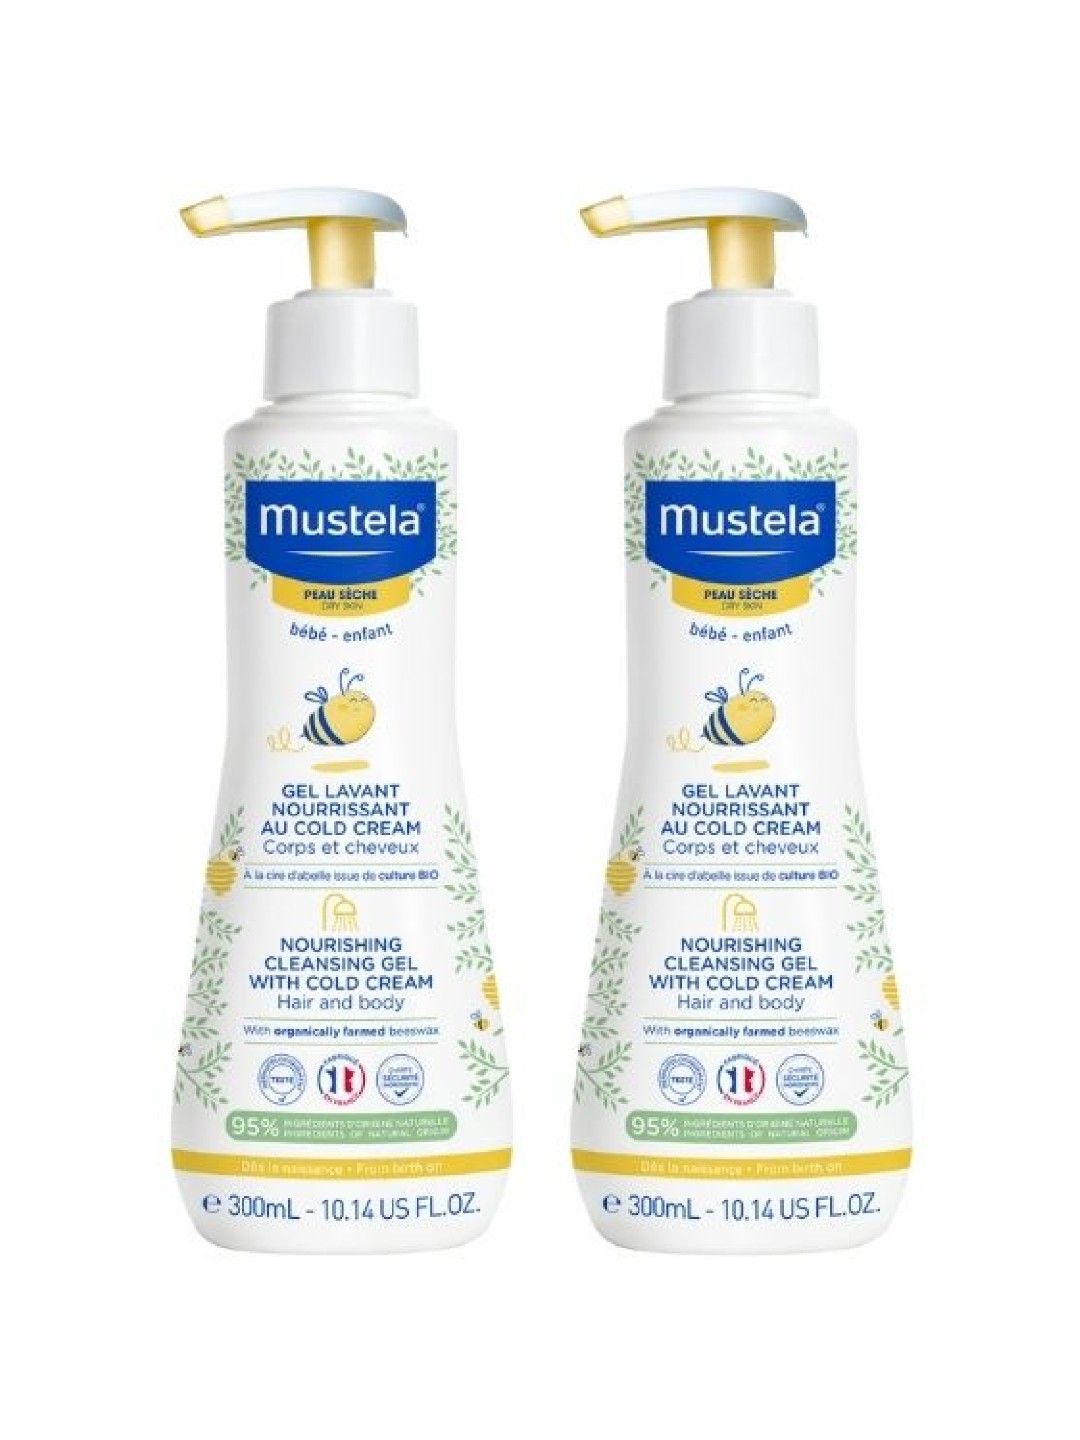 Mustela Nourishing Cleansing Gel with Cold Cream 2-pack (300 ml)